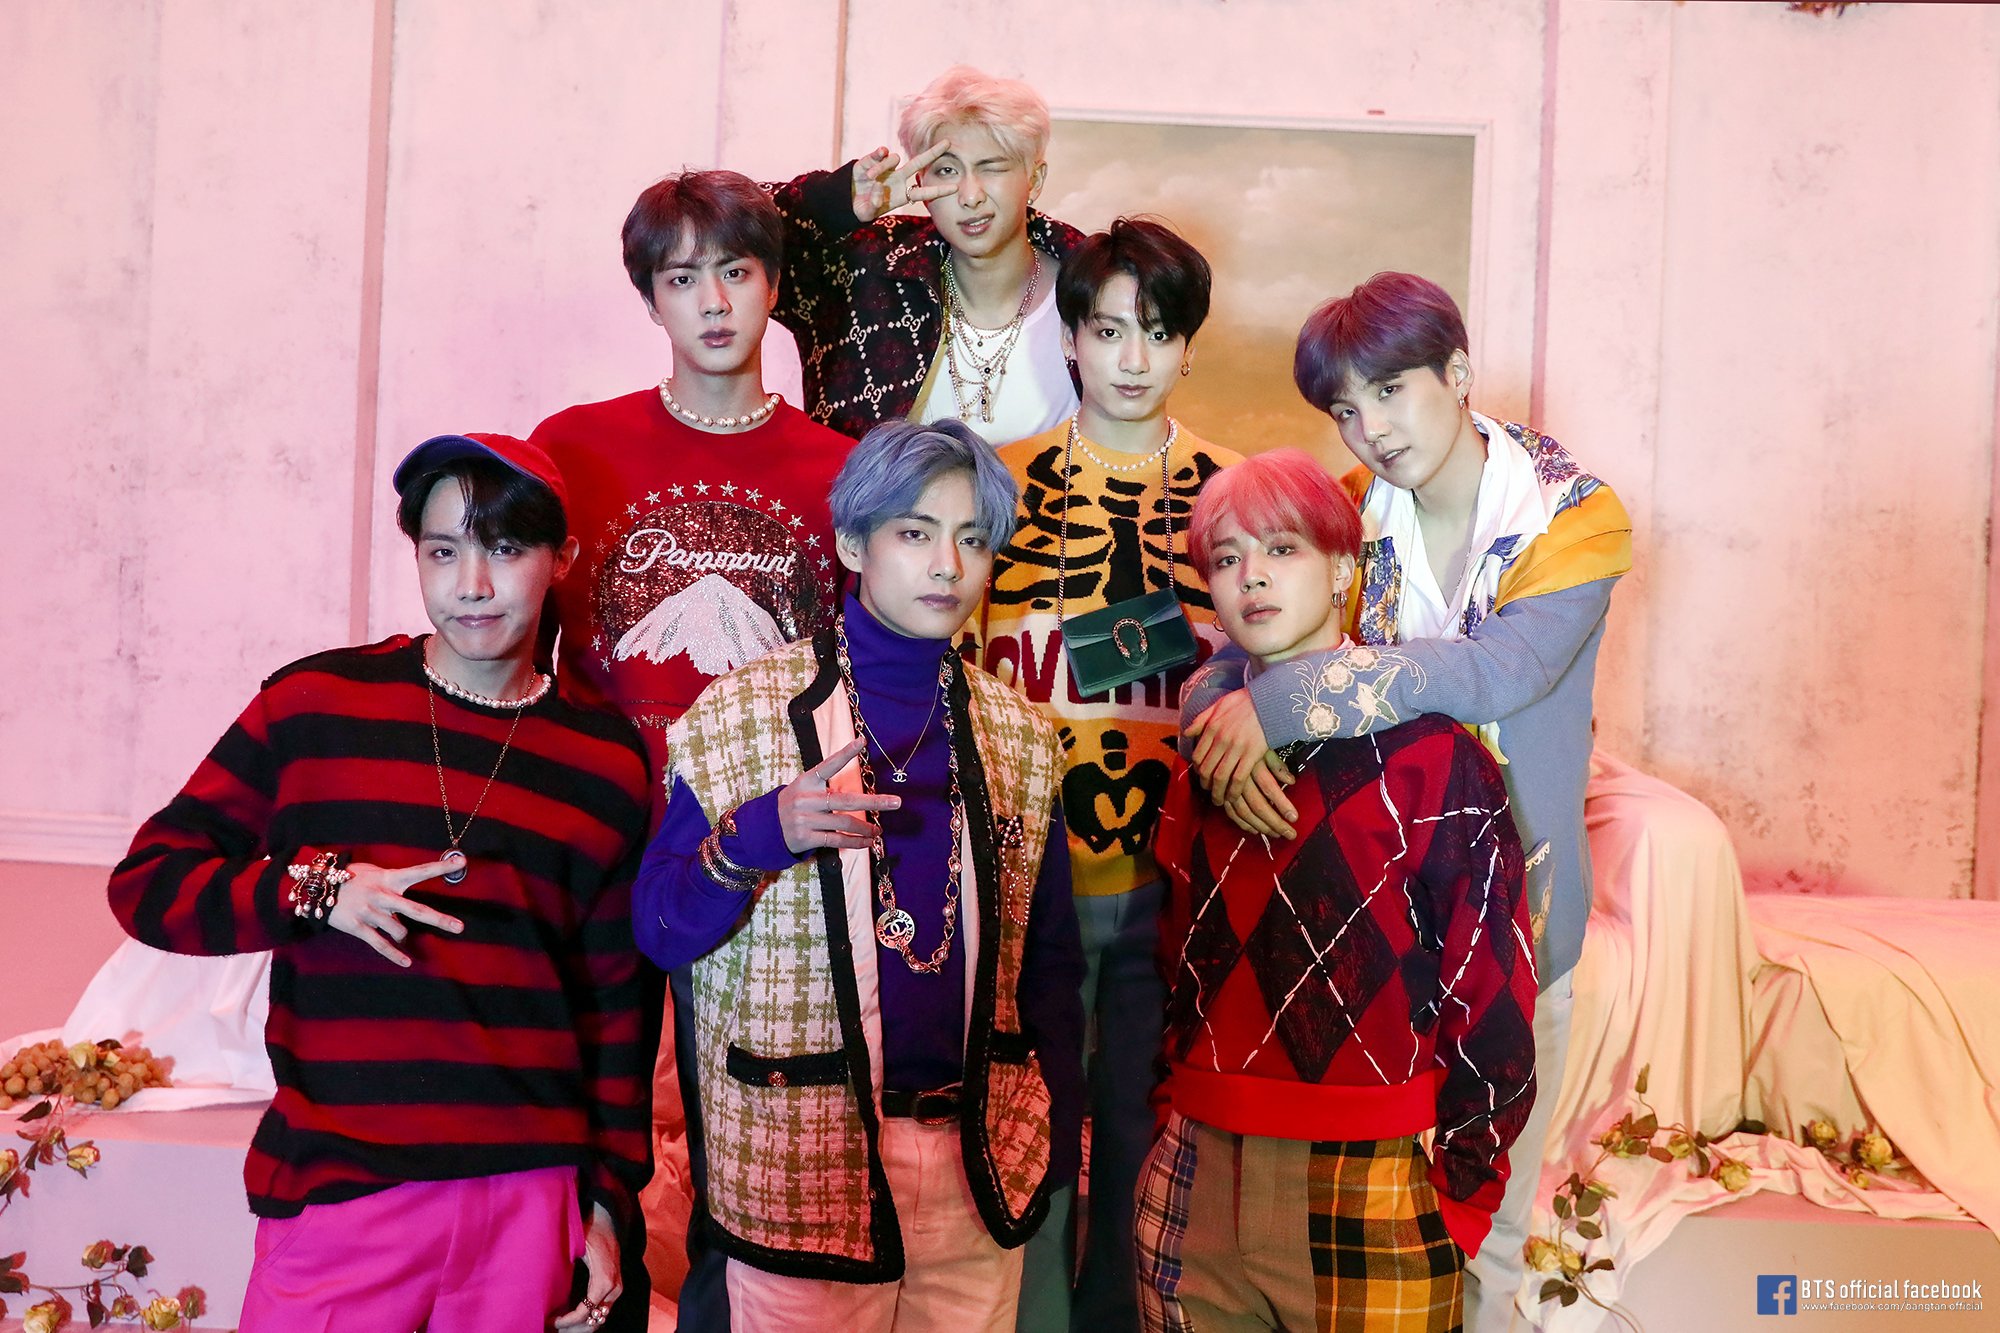 Bts Official Bts 방탄소년단 Map Of The Soul Persona Persona Concept Photo Sketch 2 T Co 2aqyfmunnu